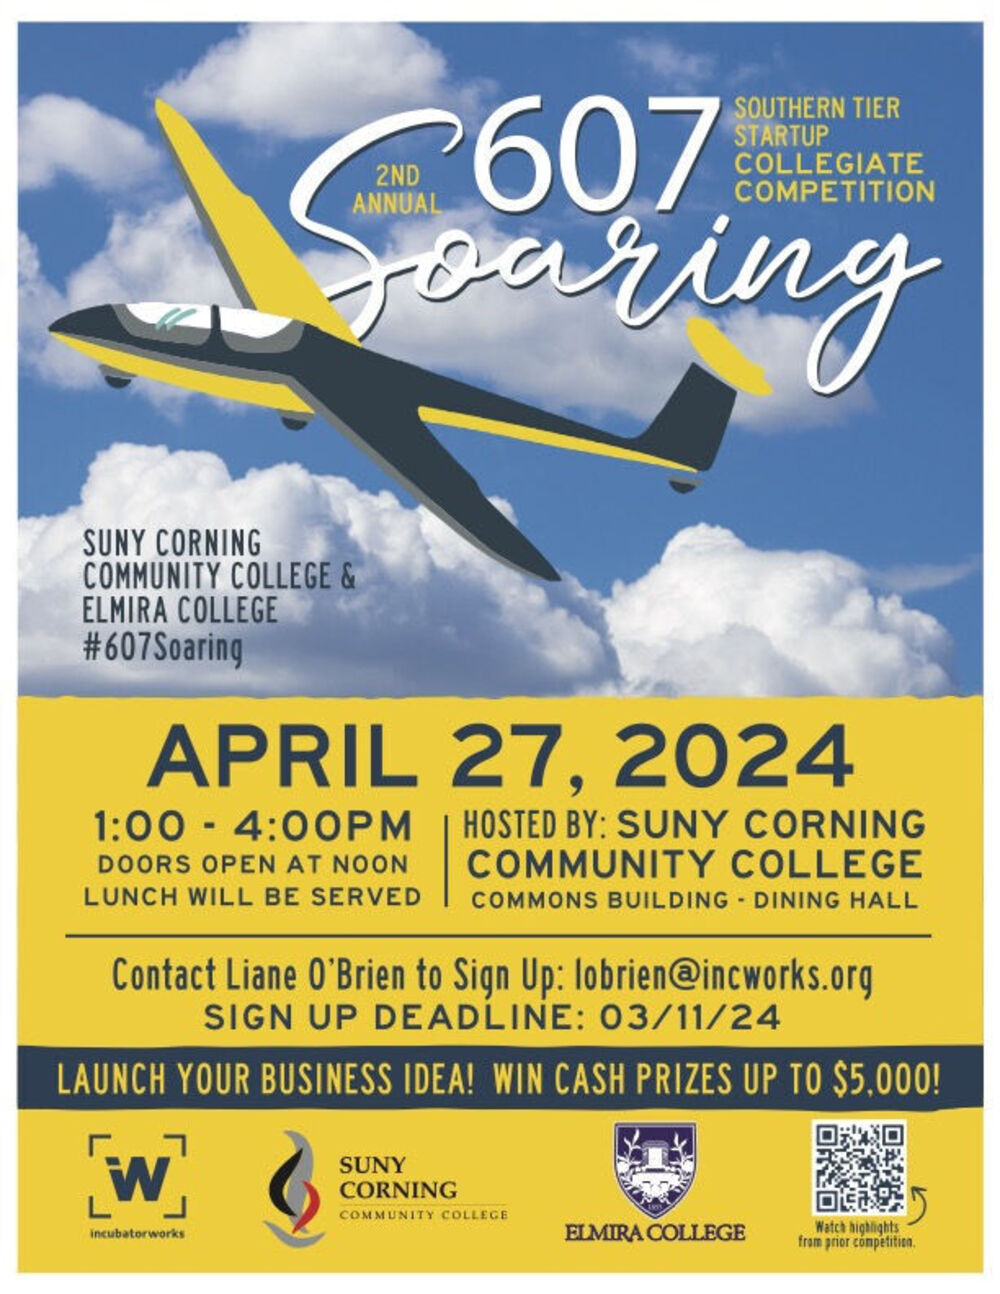 last-day-to-sign-up-for-the-607-soaring-southern-tier-startup-collegiate-competition